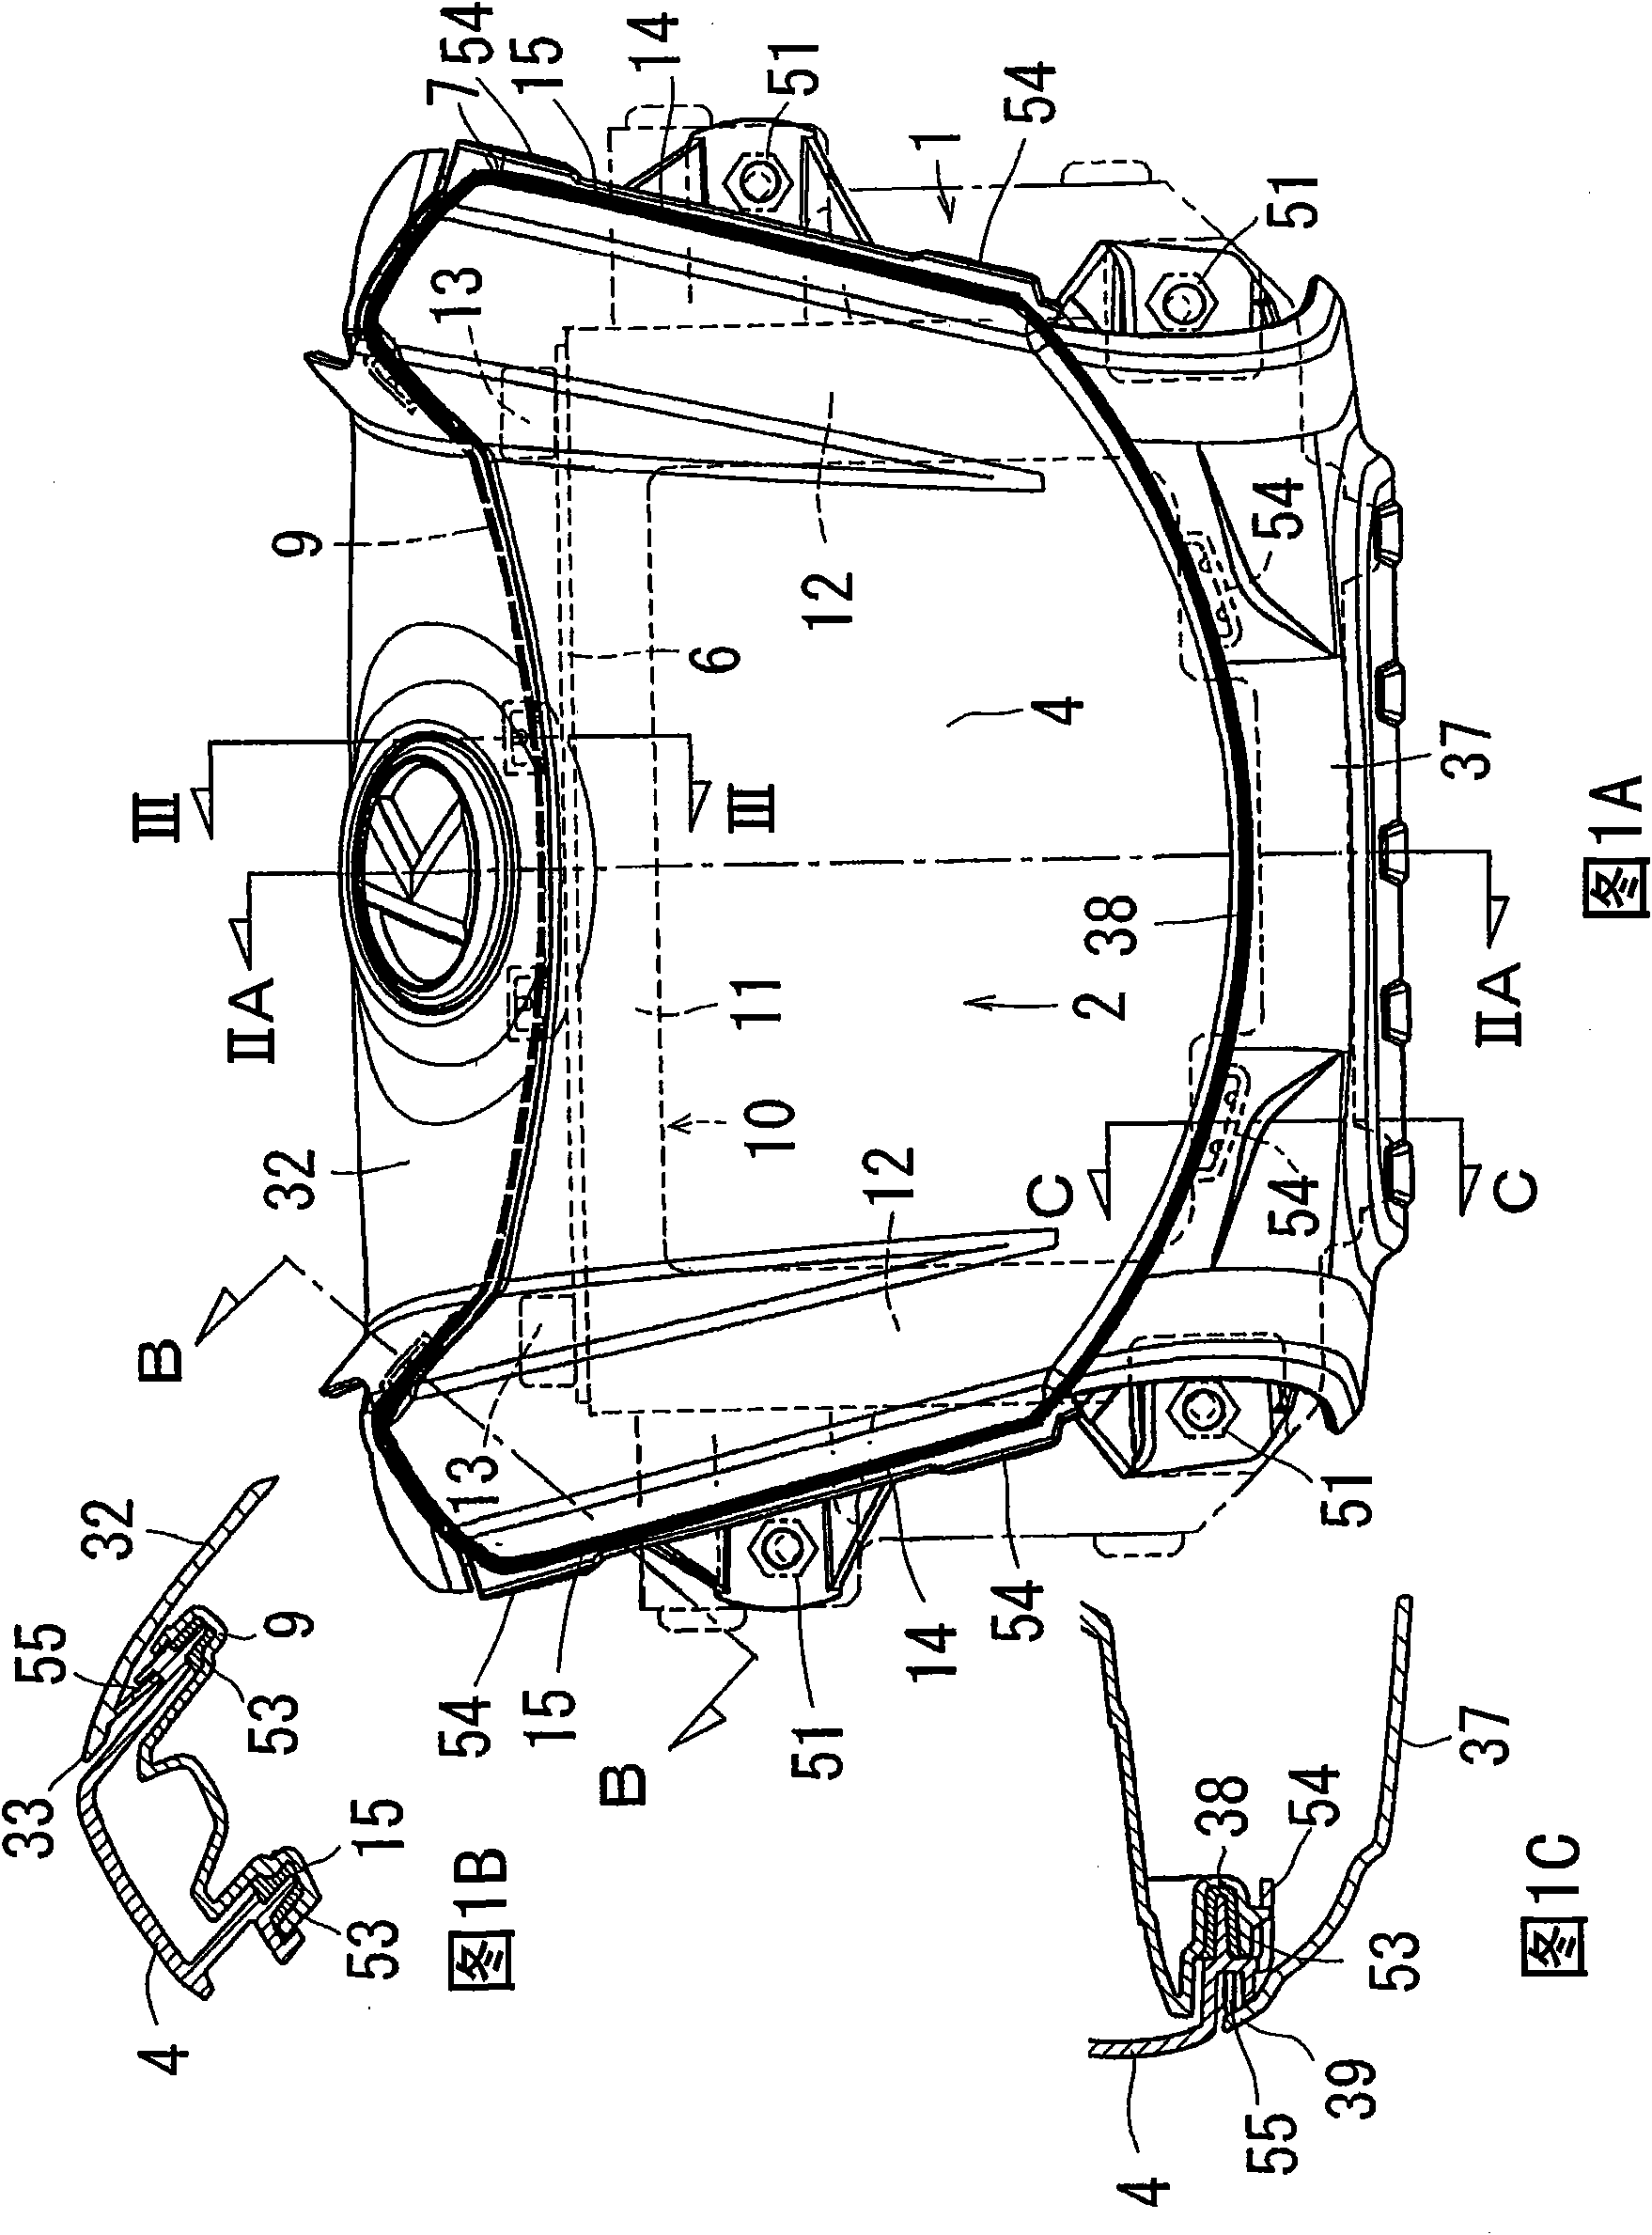 Structure for supporting head light and fuel tank